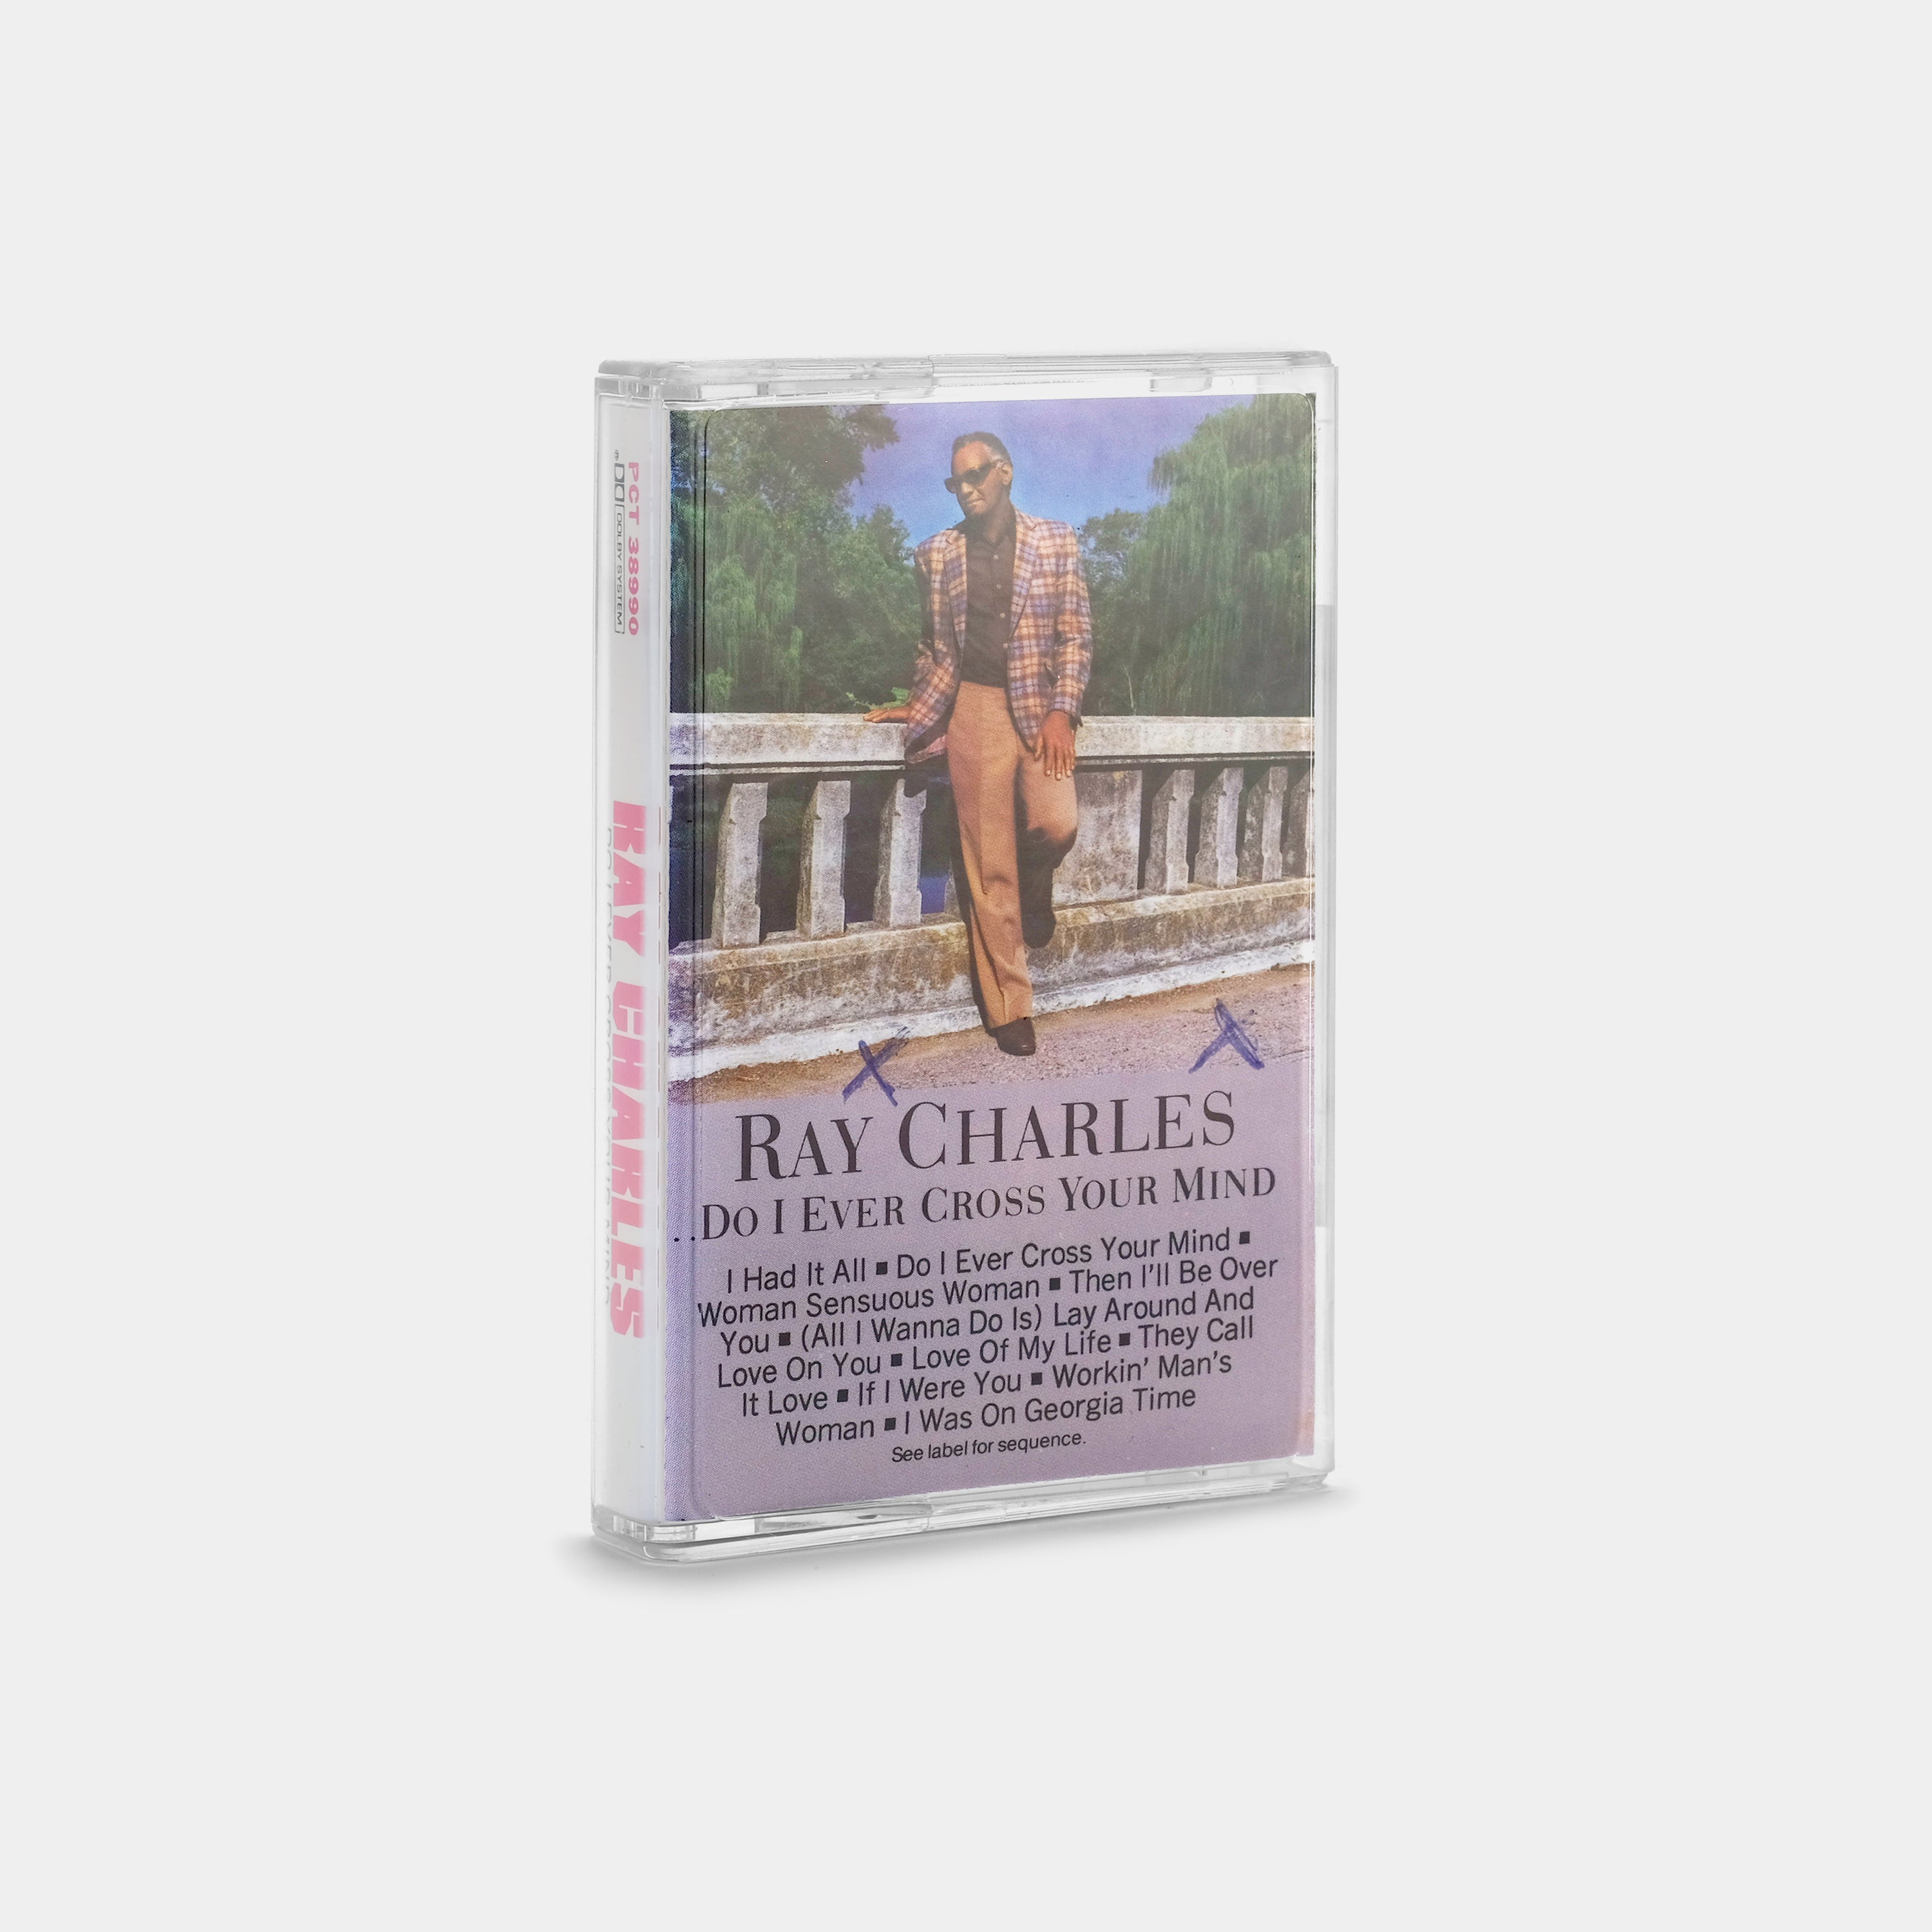 Ray Charles - Do I Ever Cross Your Mind Cassette Tape